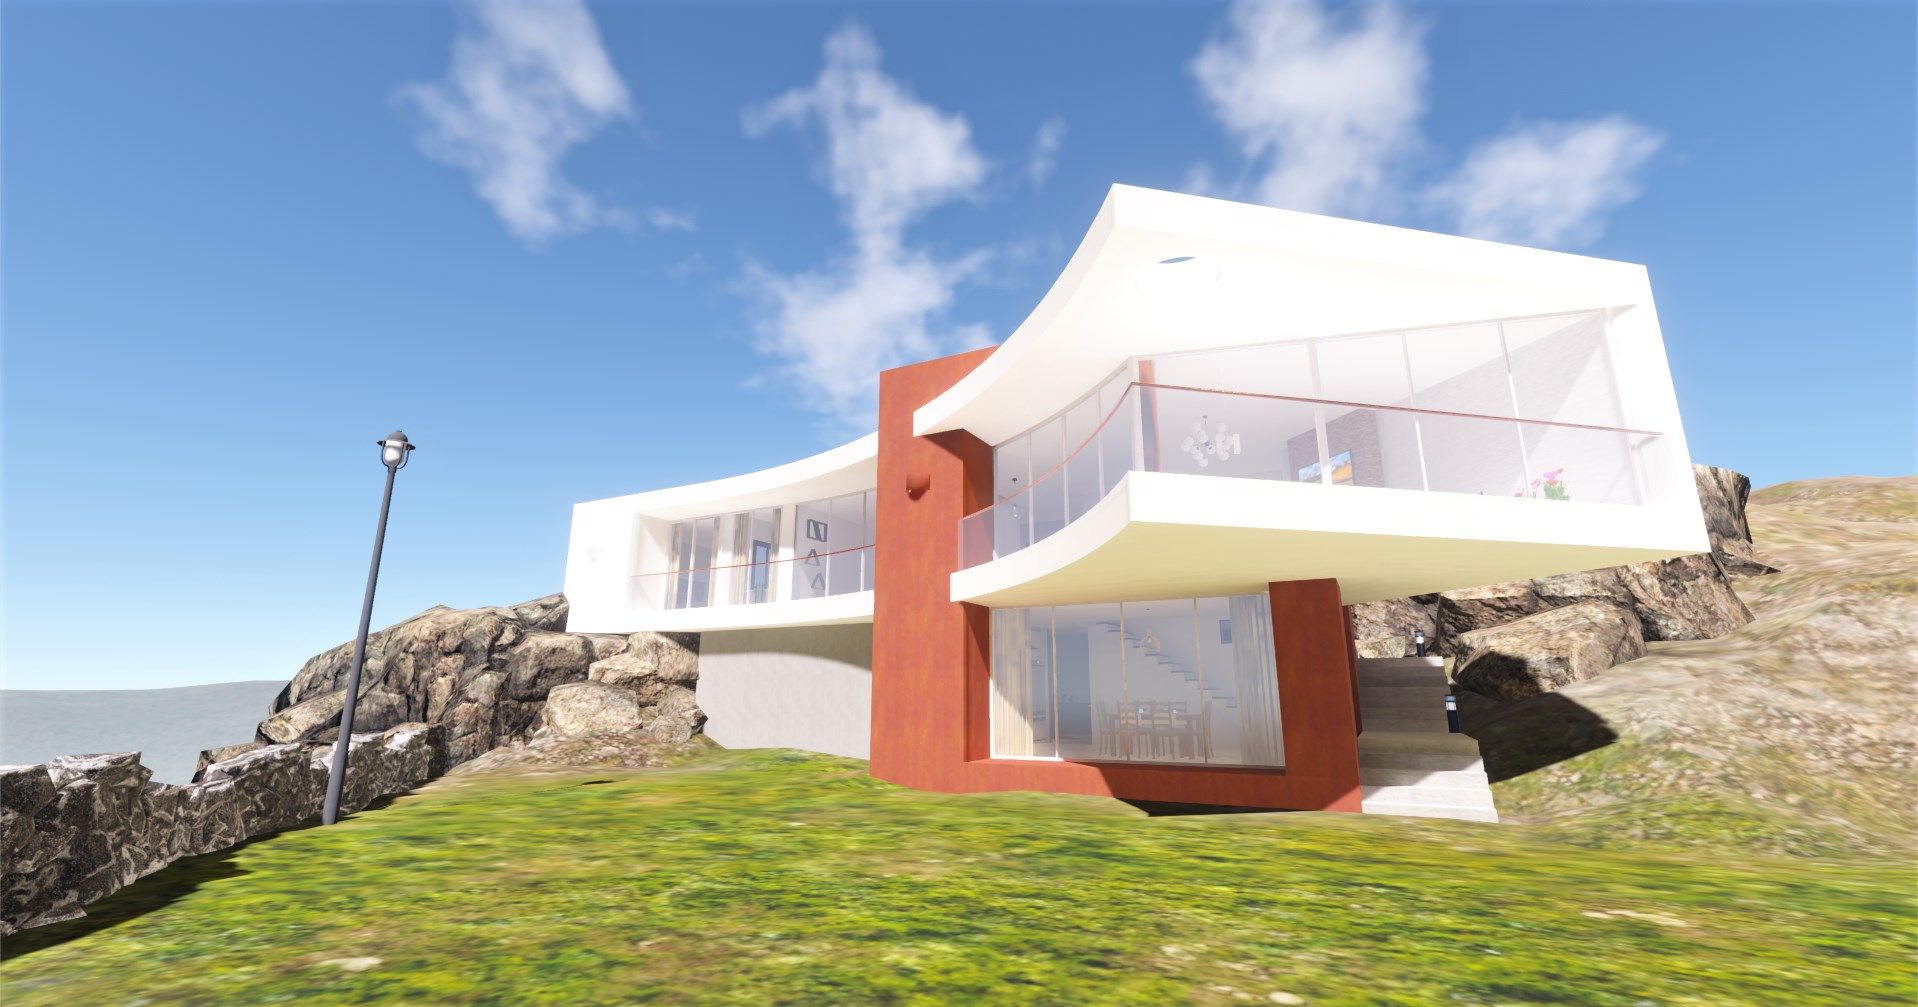 A virtual visit to a three-bedroom, two-stories villa fictionally situated in South Spain